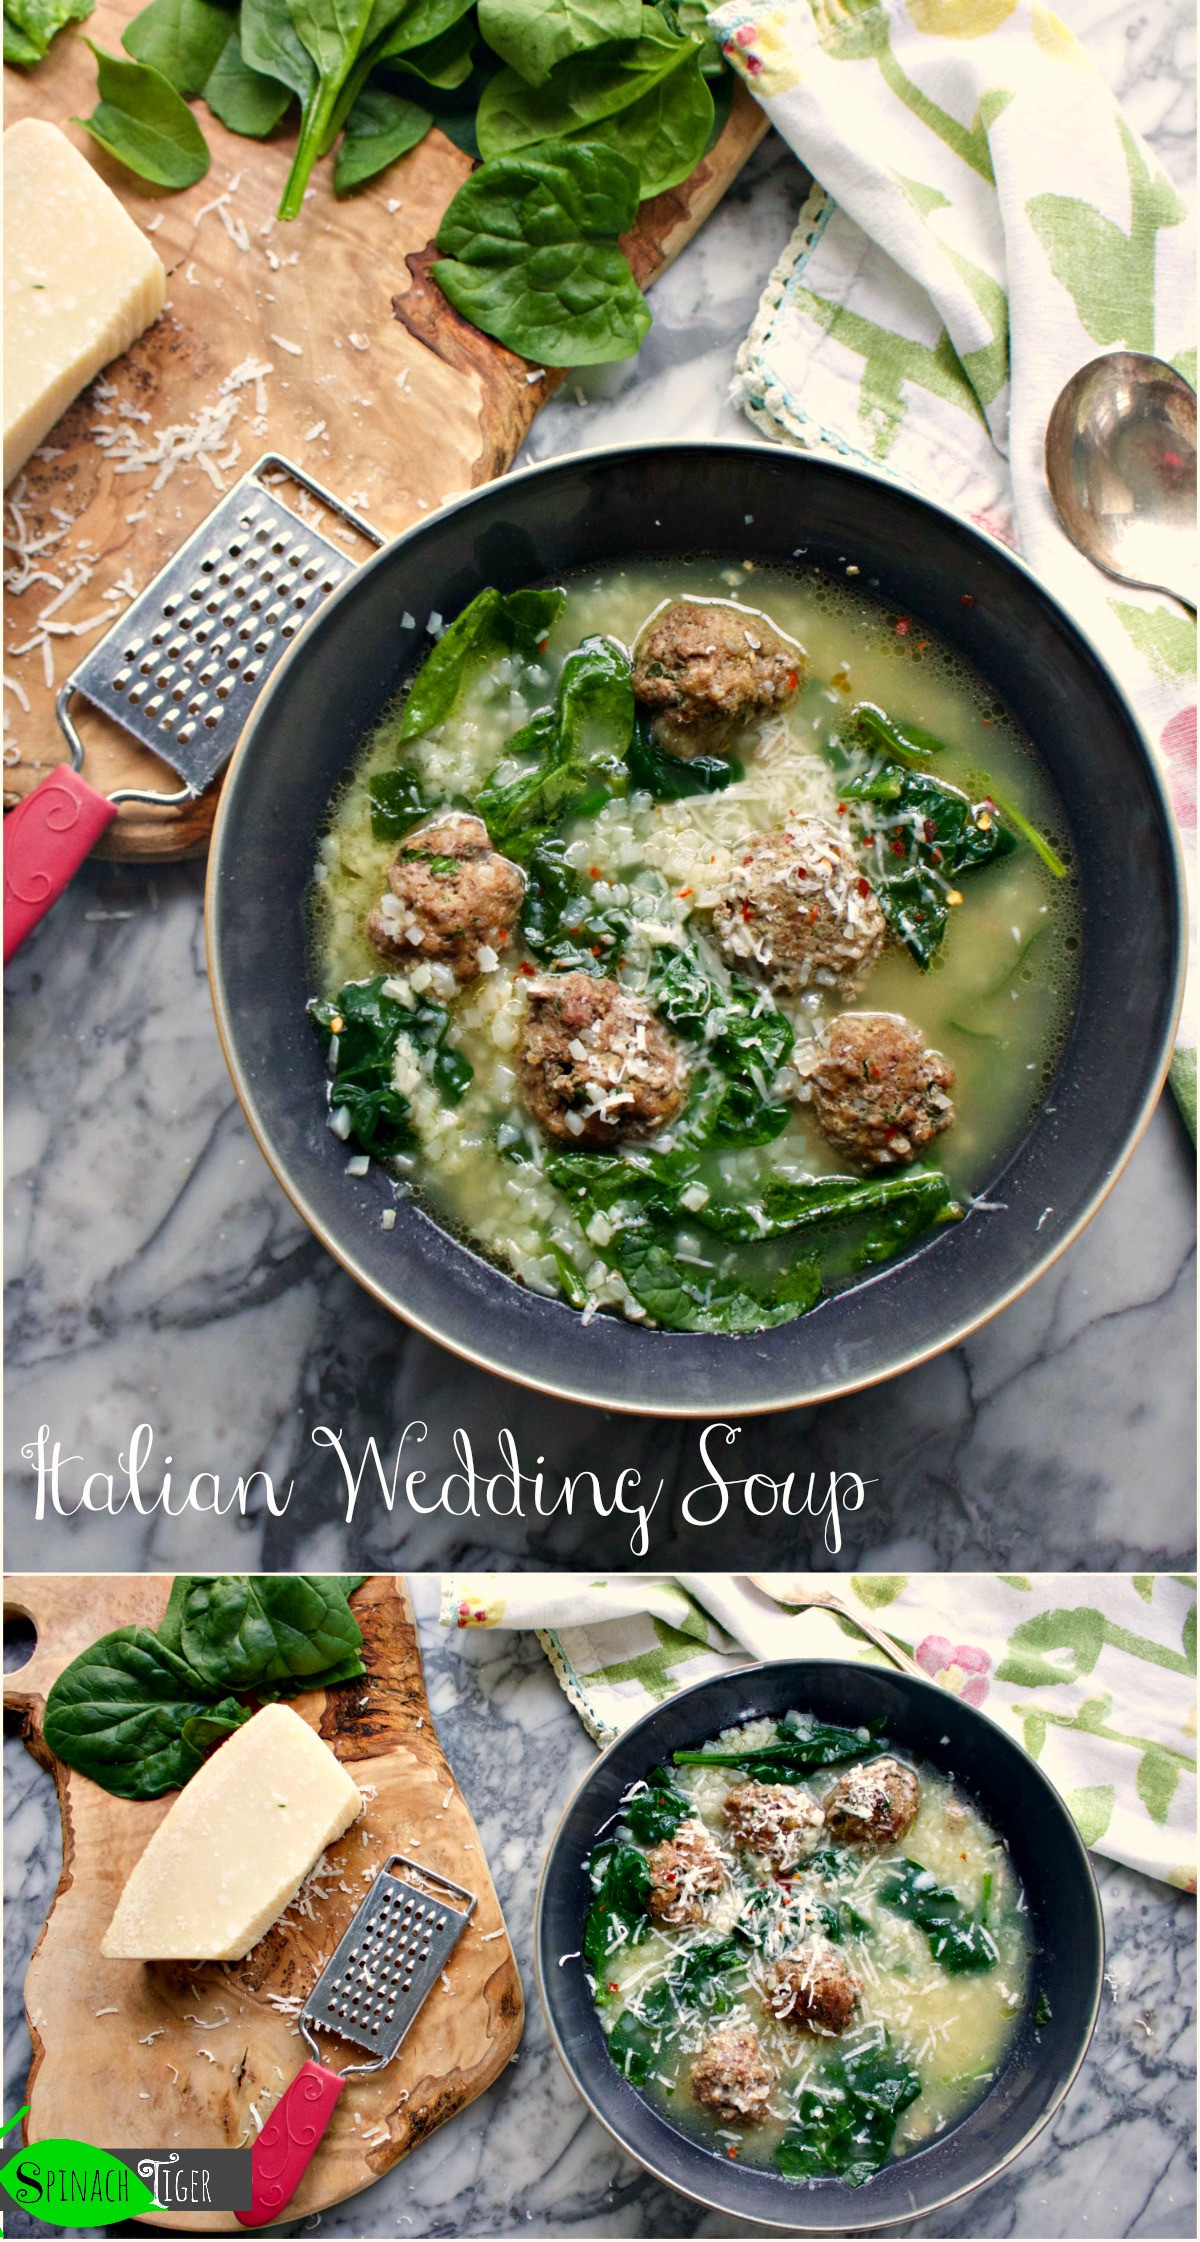 Italian Wedding Soup Recipes With Spinach
 Italian Wedding Soup Keto Paleo Friendly Spinach Tiger